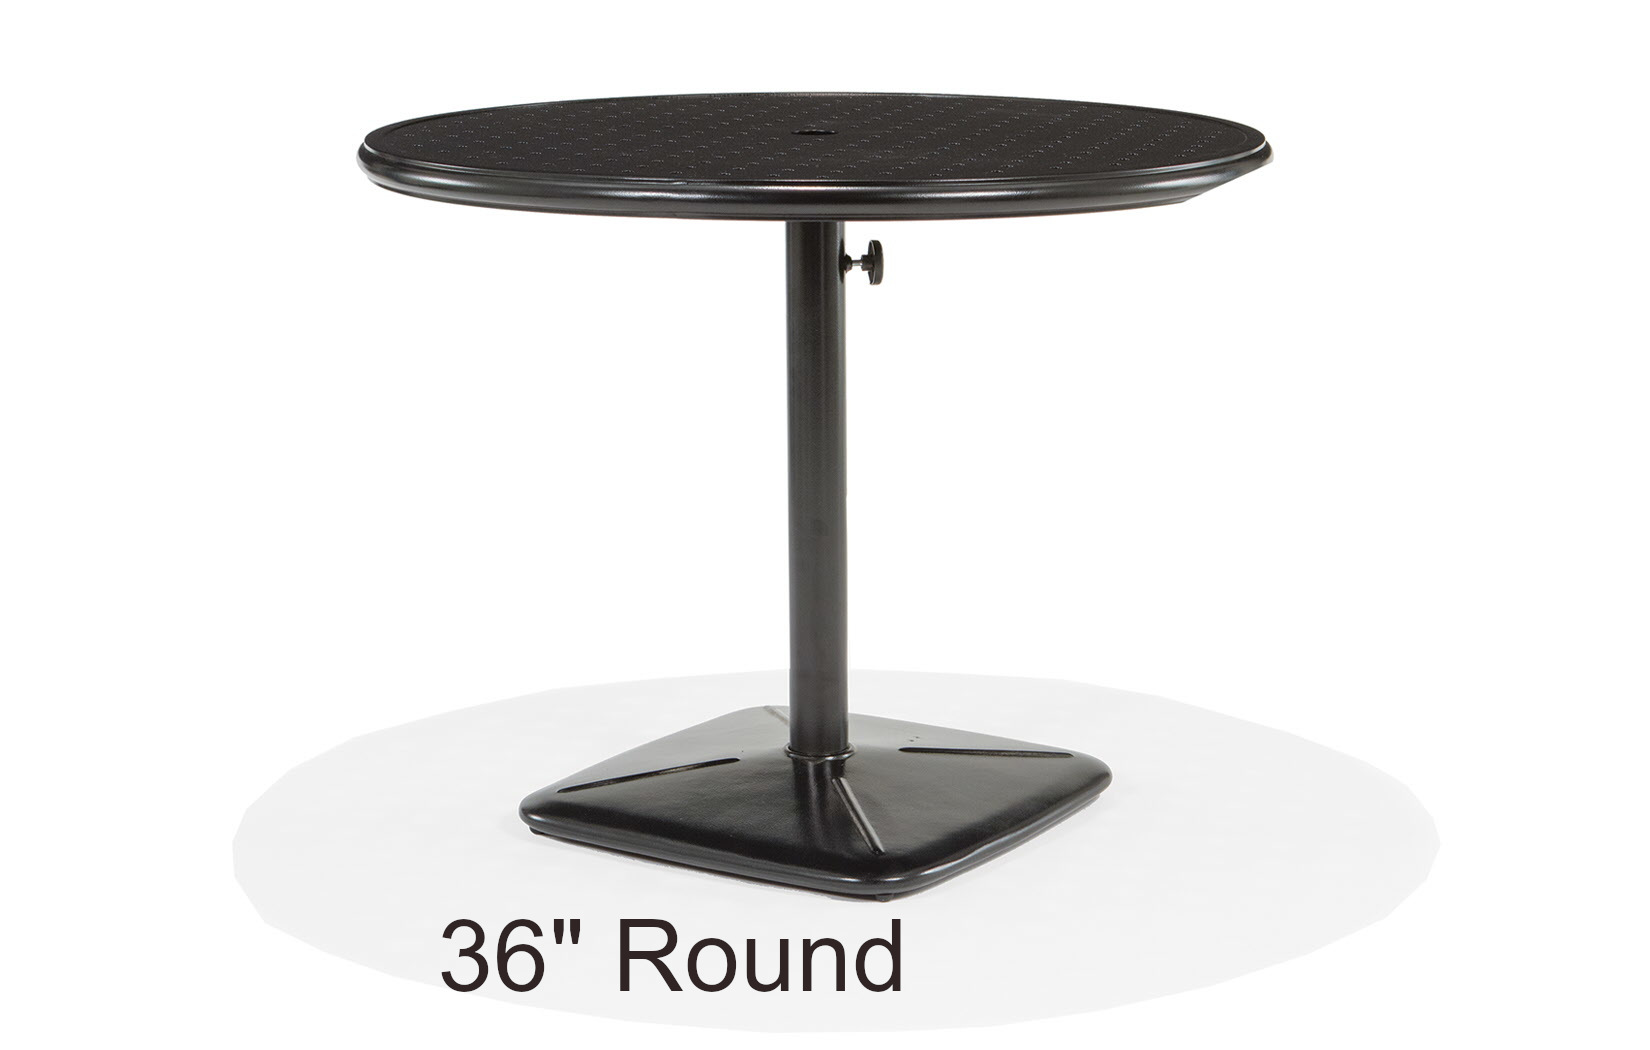 Stamped Aluminum Top 36 Inch Round Pedestal Cafe Table